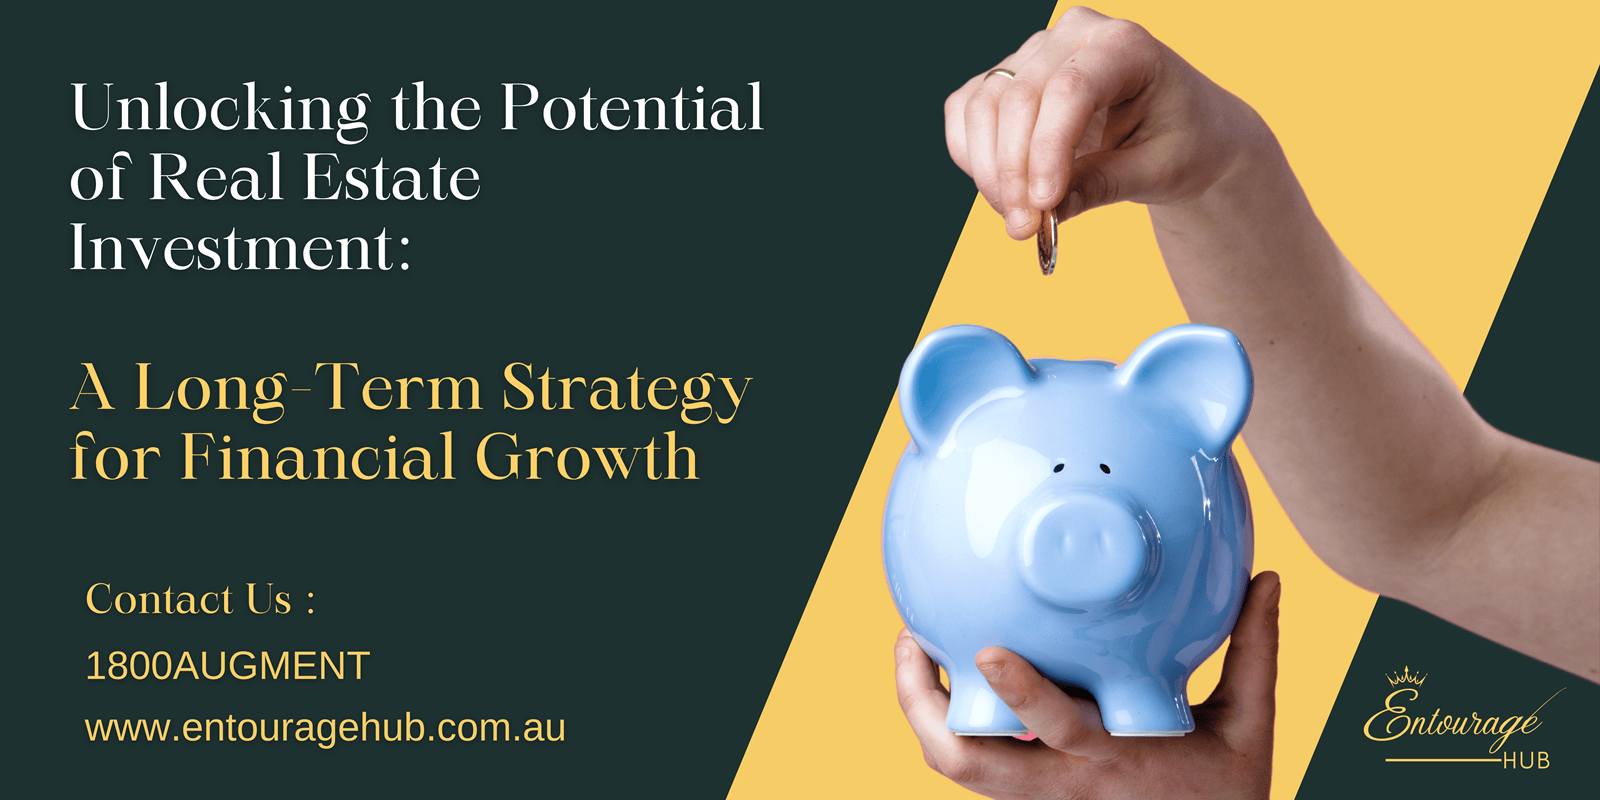 Unlocking the Potential of Real Estate Investment: A Long-Term Strategy for Financial Growth